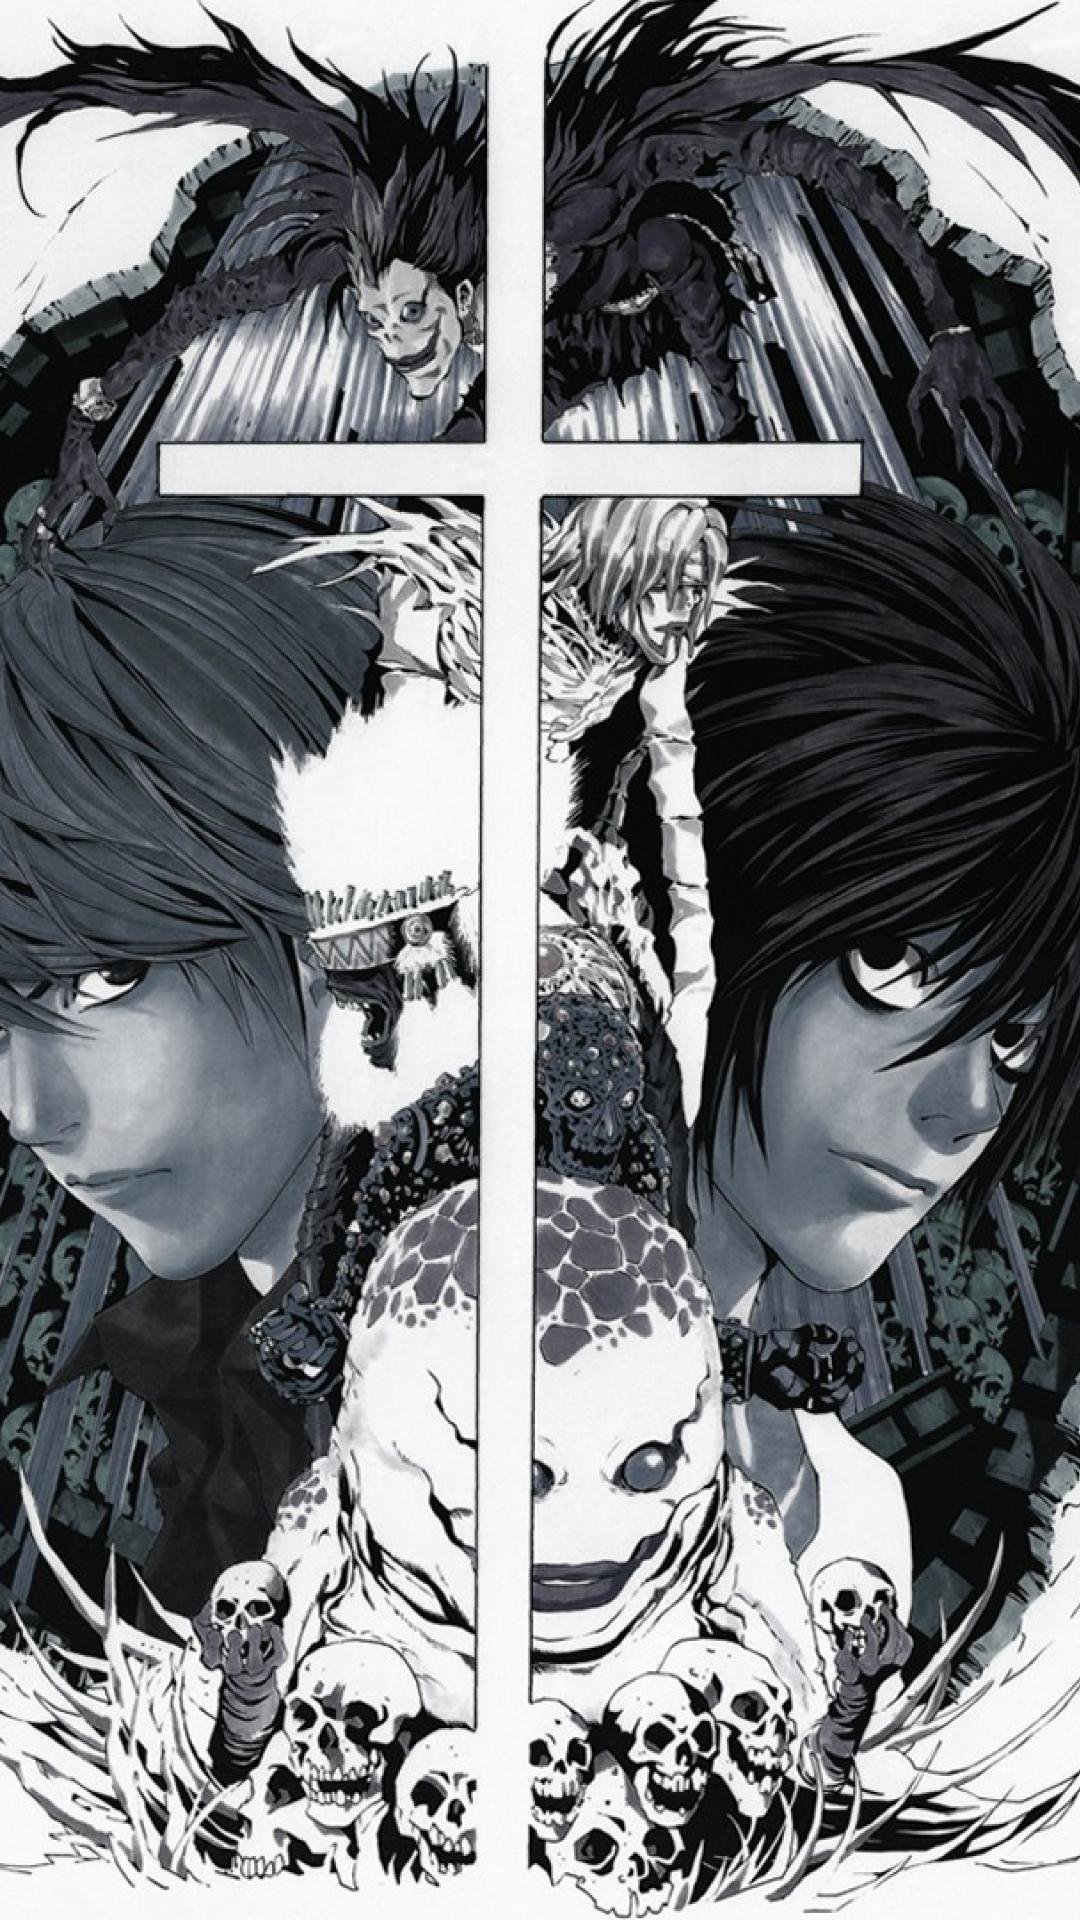 15 Death Note iPhone wallpapers in 2023 Free HD download  iGeeksBlog